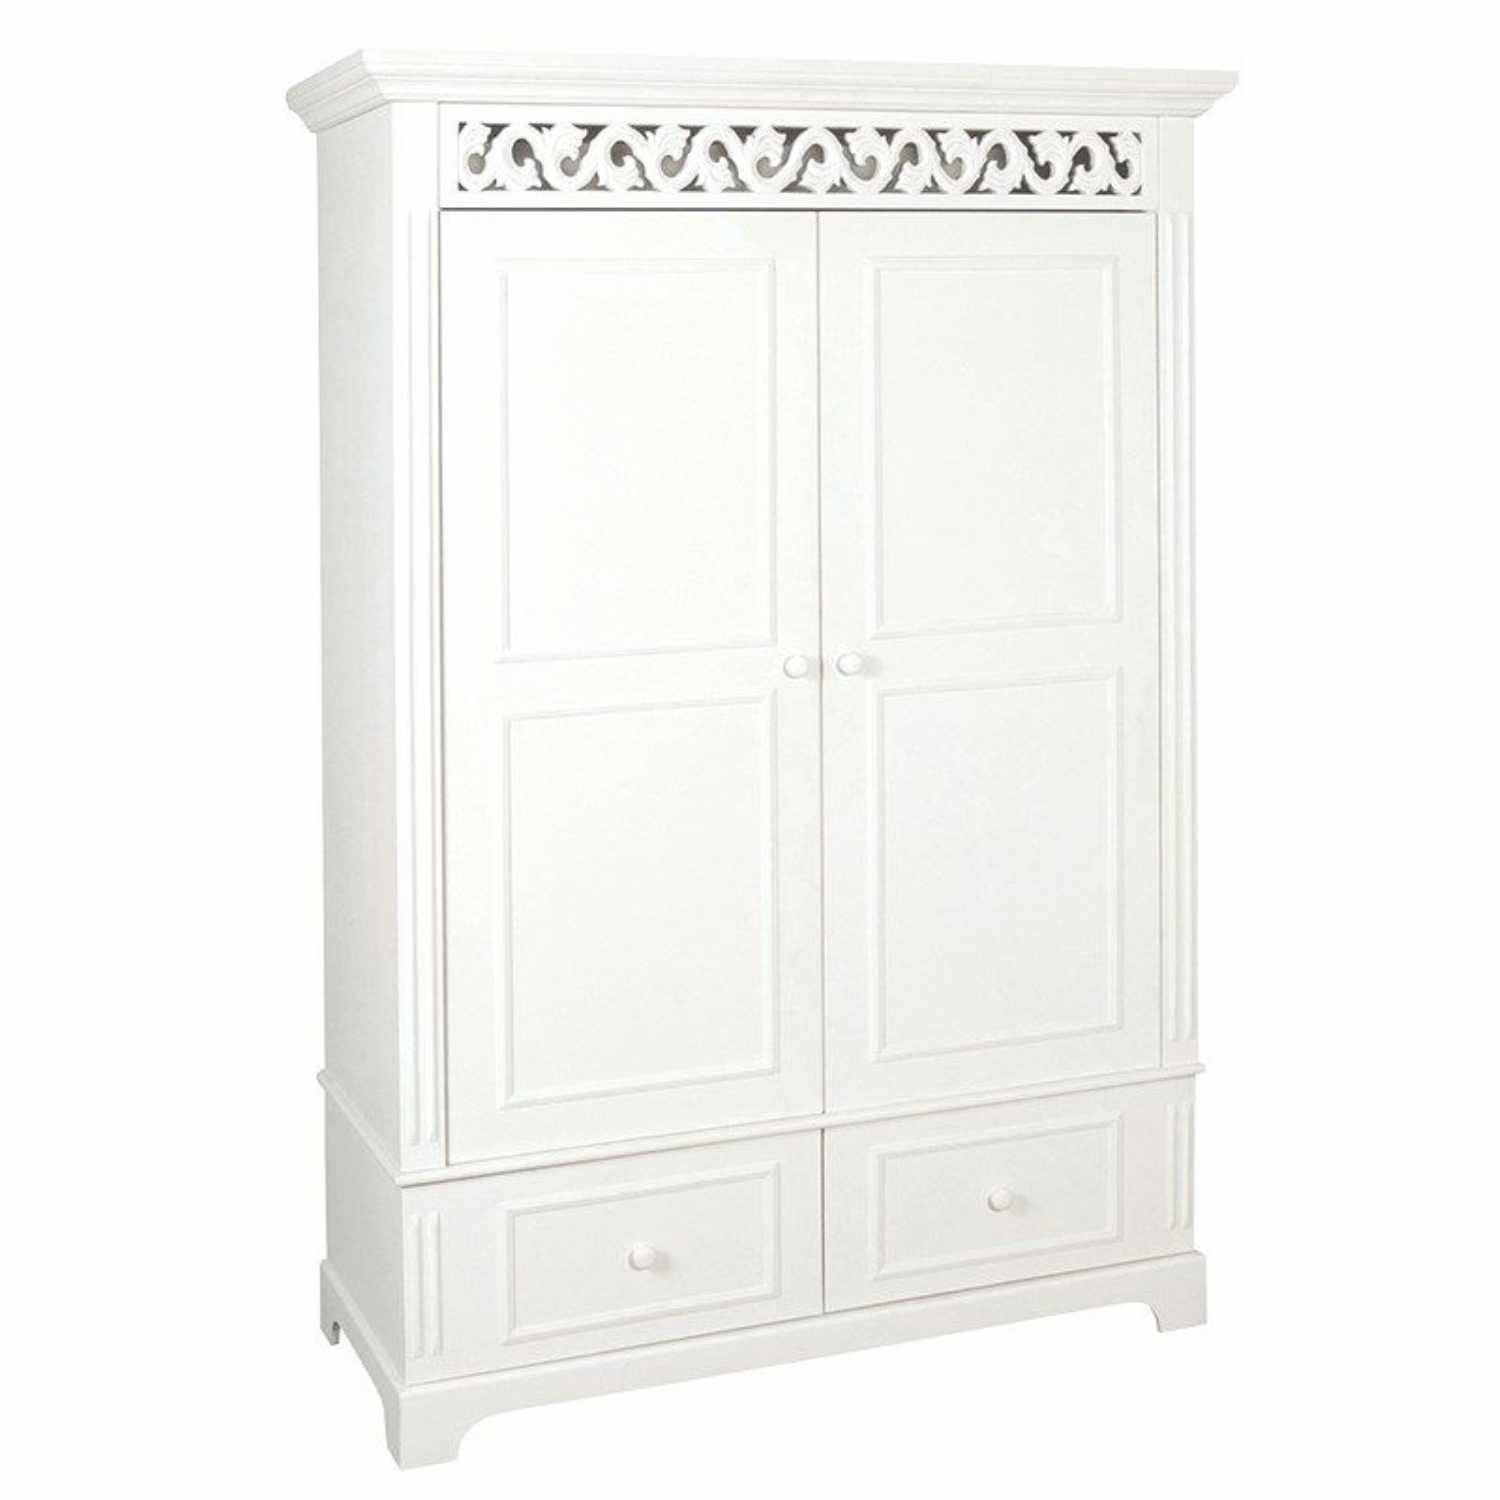 White Painted Shabby Chic Belgravia Large Double 2 Drawer Wardrobe Within White Double Wardrobes (View 9 of 15)